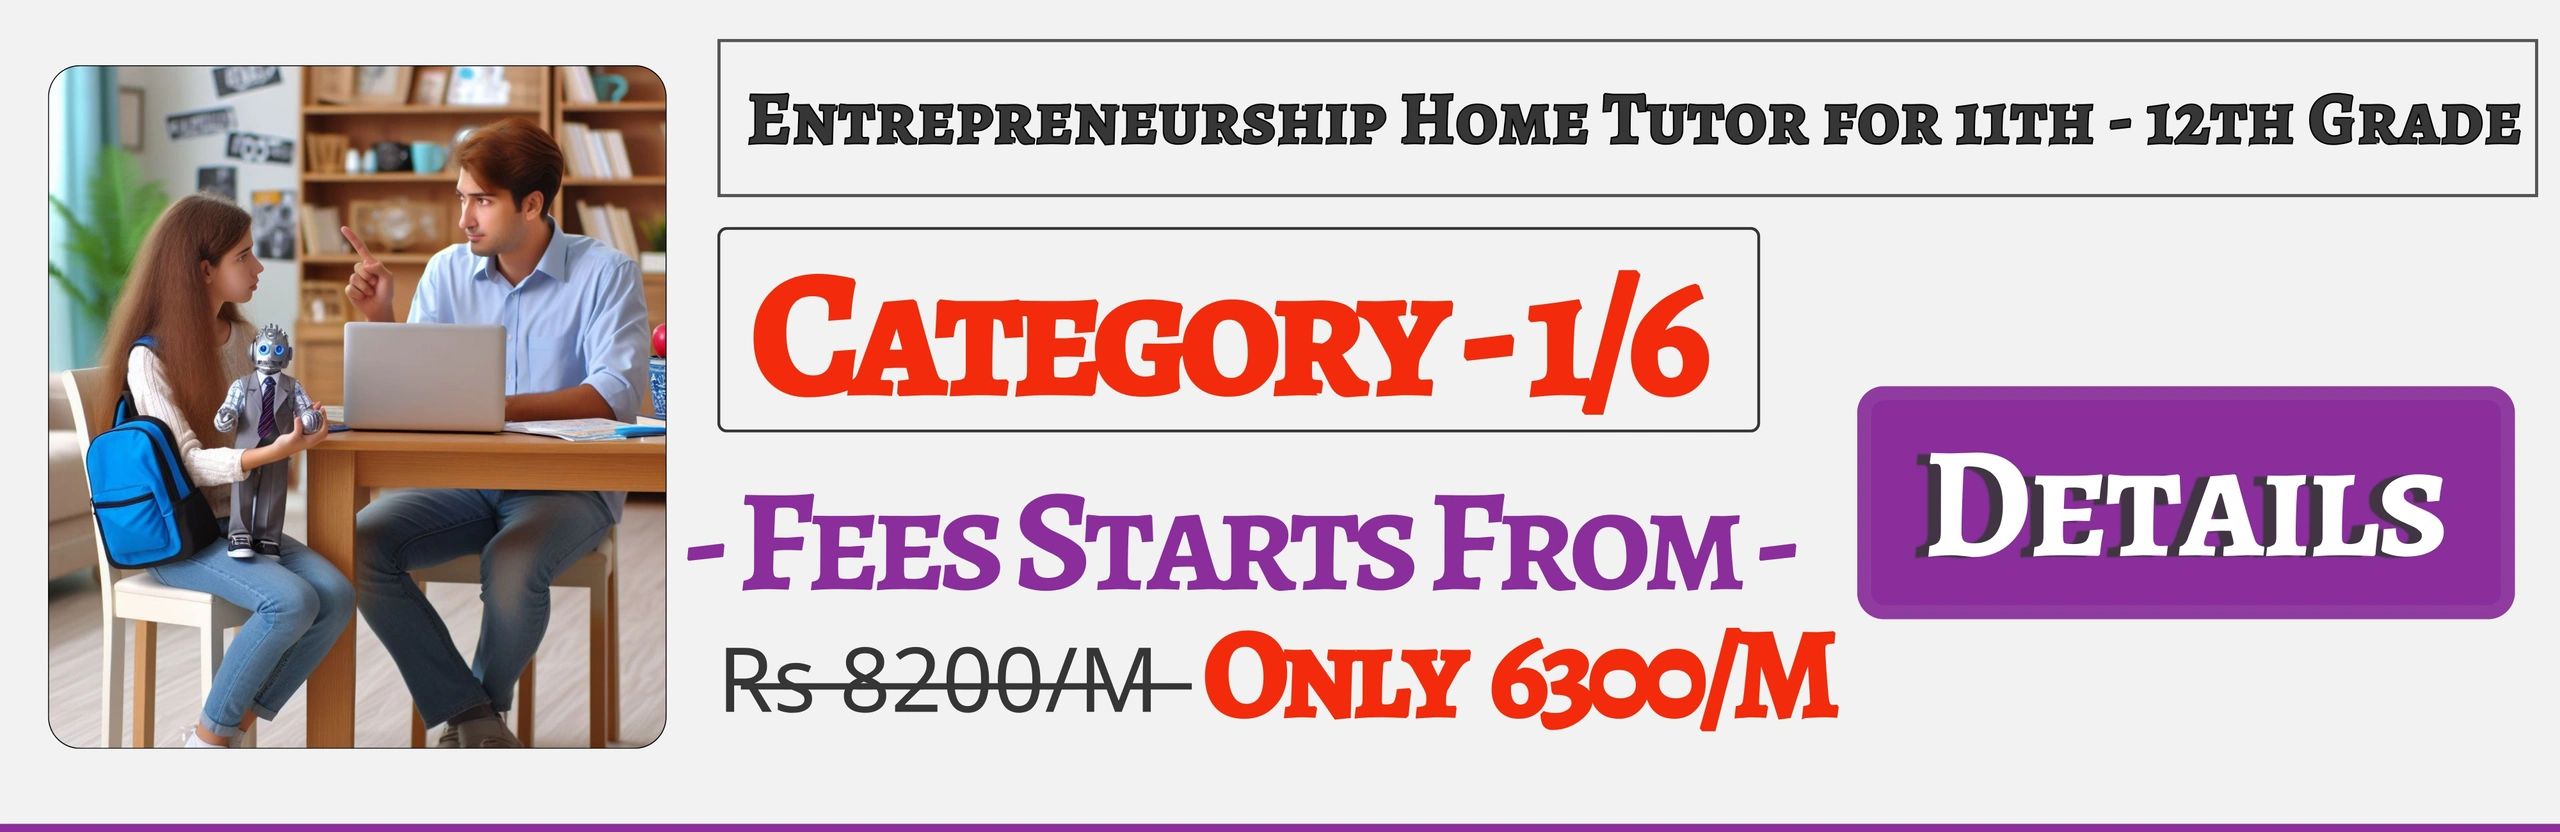 Book Best Nearby Entrepreneurship Home Tuition Tutors For 11th & 12th In Jaipur , Fees Only 6300/M